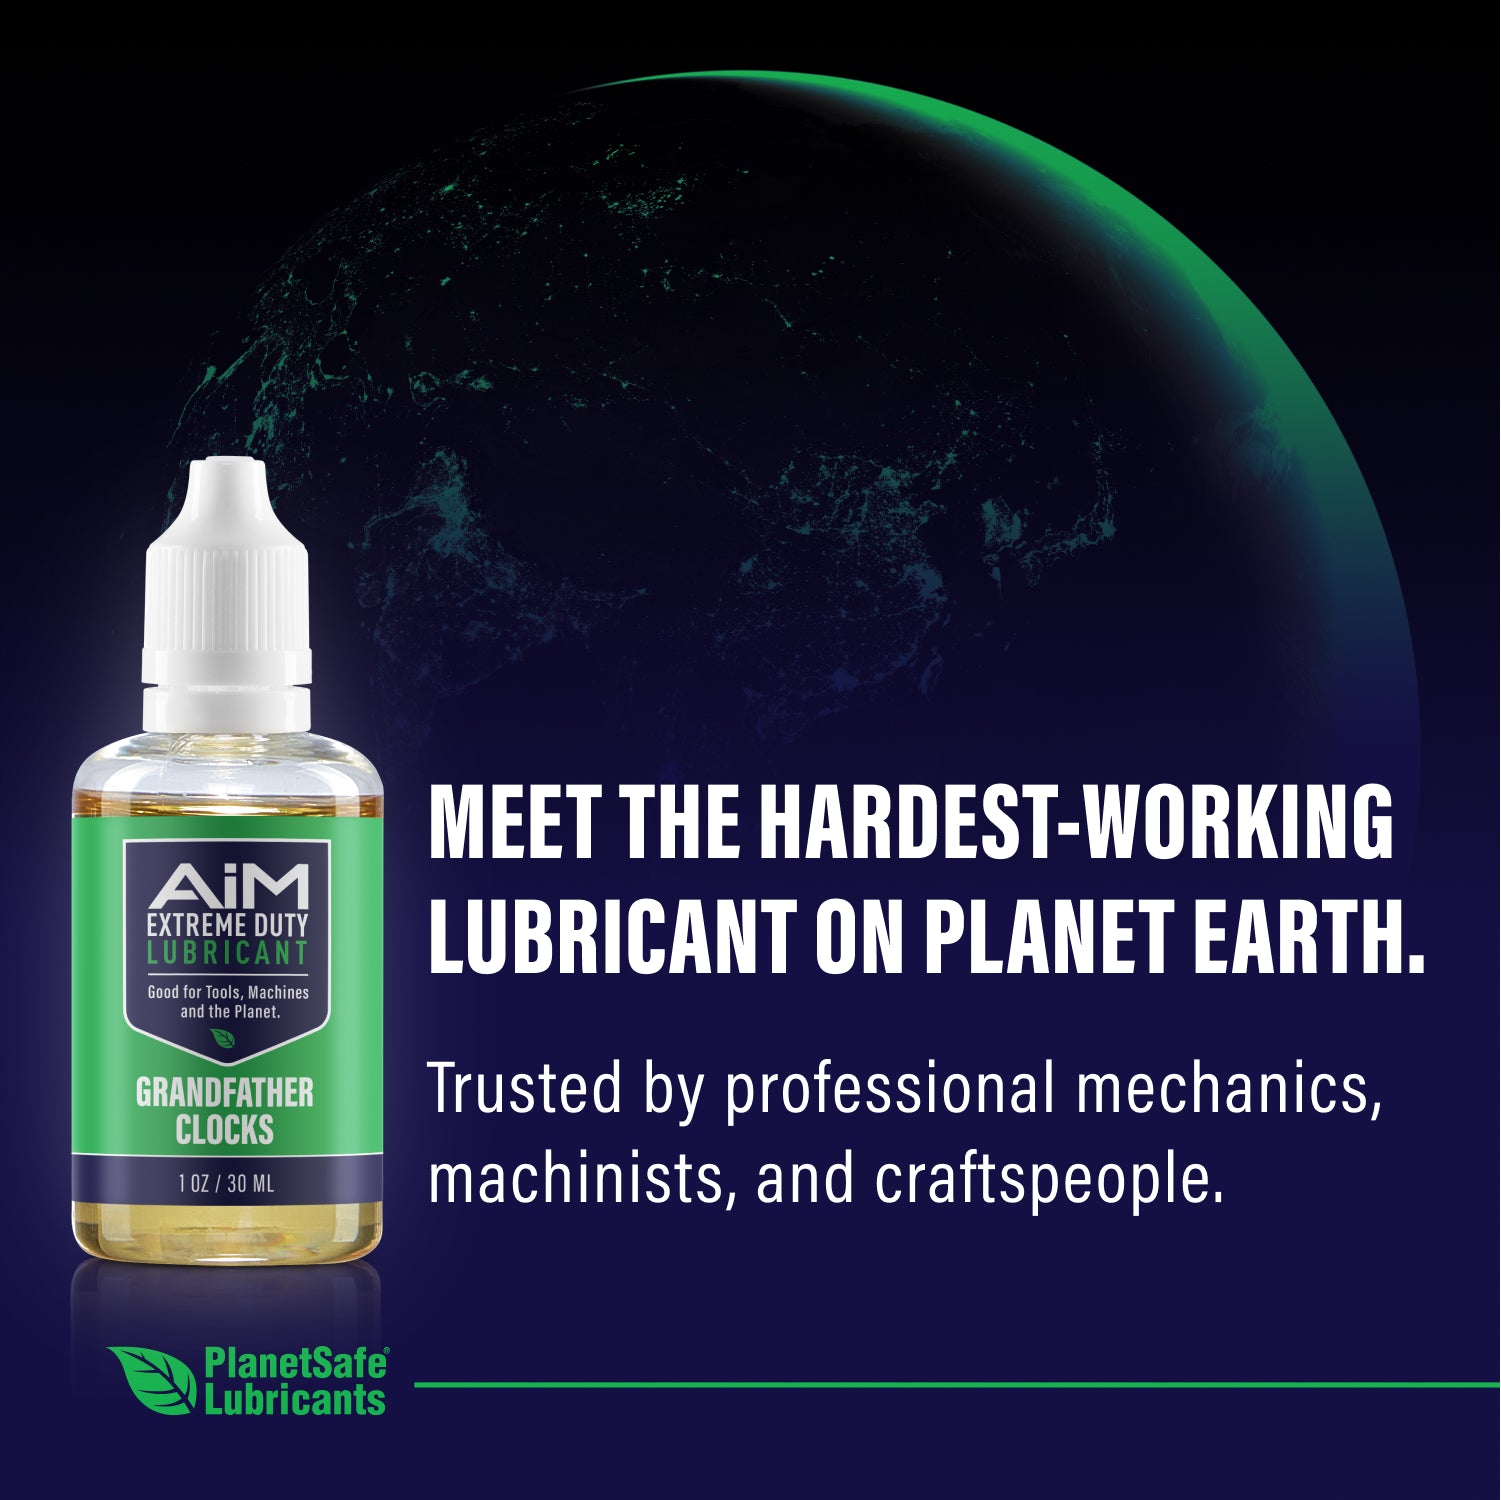 Best Clock Oil - PlanetSafe AIM Clock Oil - The Ultimate Grandfather Clock and Cuckoo Clock Lubricant - Cleans, Lubricates, Protects - Safe, Non-Toxic, Odorless - what is the best clock oil lube?